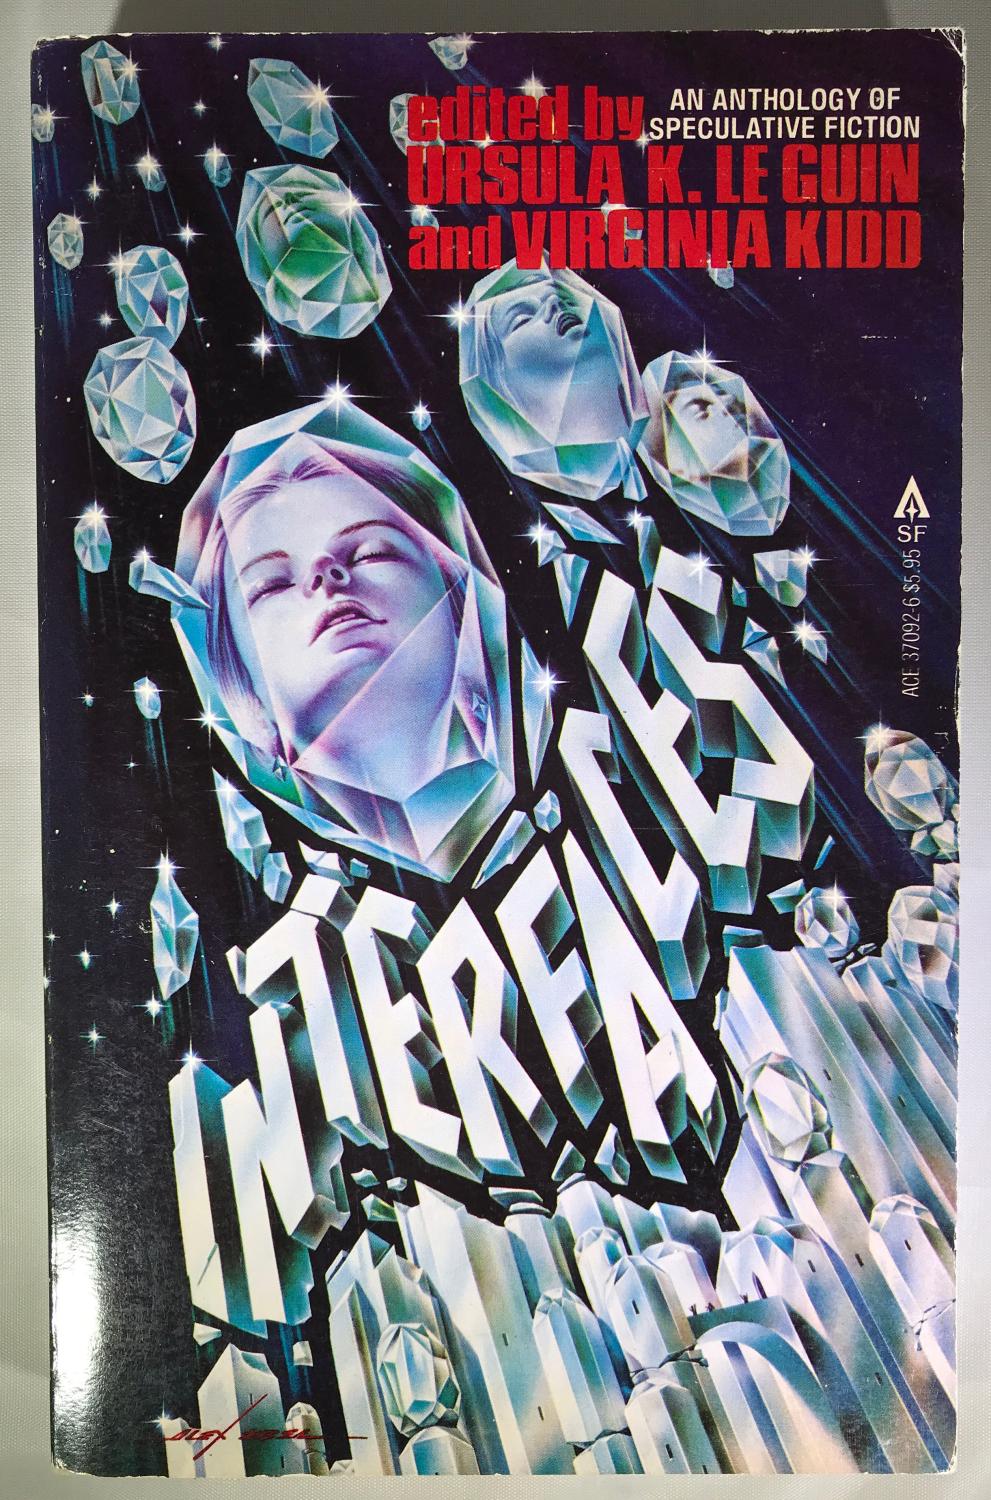 Interfaces: An Anthology of Speculative Fiction [SIGNED] - Ursula K. Le Guin & Virginia Kidd (editors)